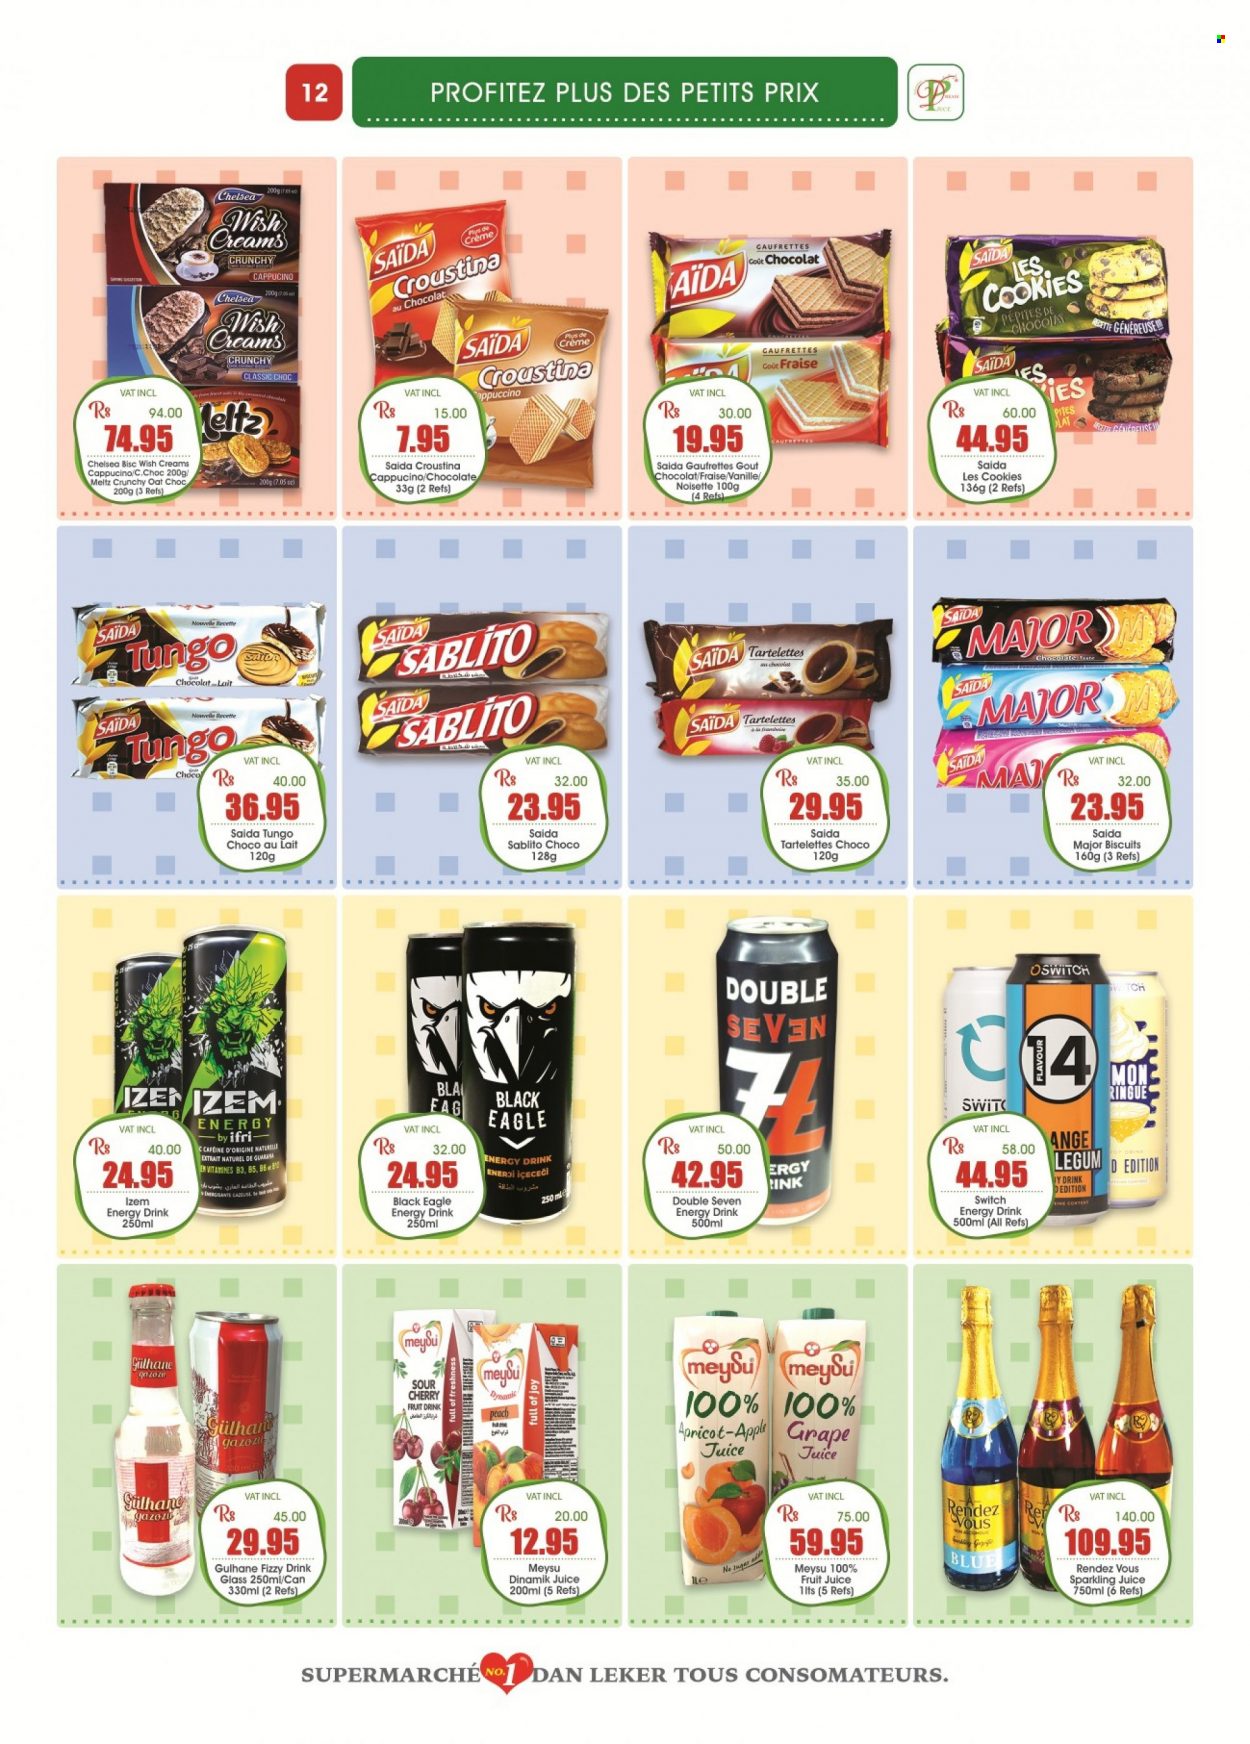 thumbnail - Dreamprice Catalogue - 19.08.2022 - 12.09.2022 - Sales products - Ace, cookies, chocolate, biscuit, oats, switch, juice, fruit juice, energy drink, fruit drink, sparkling juice, Joy. Page 12.